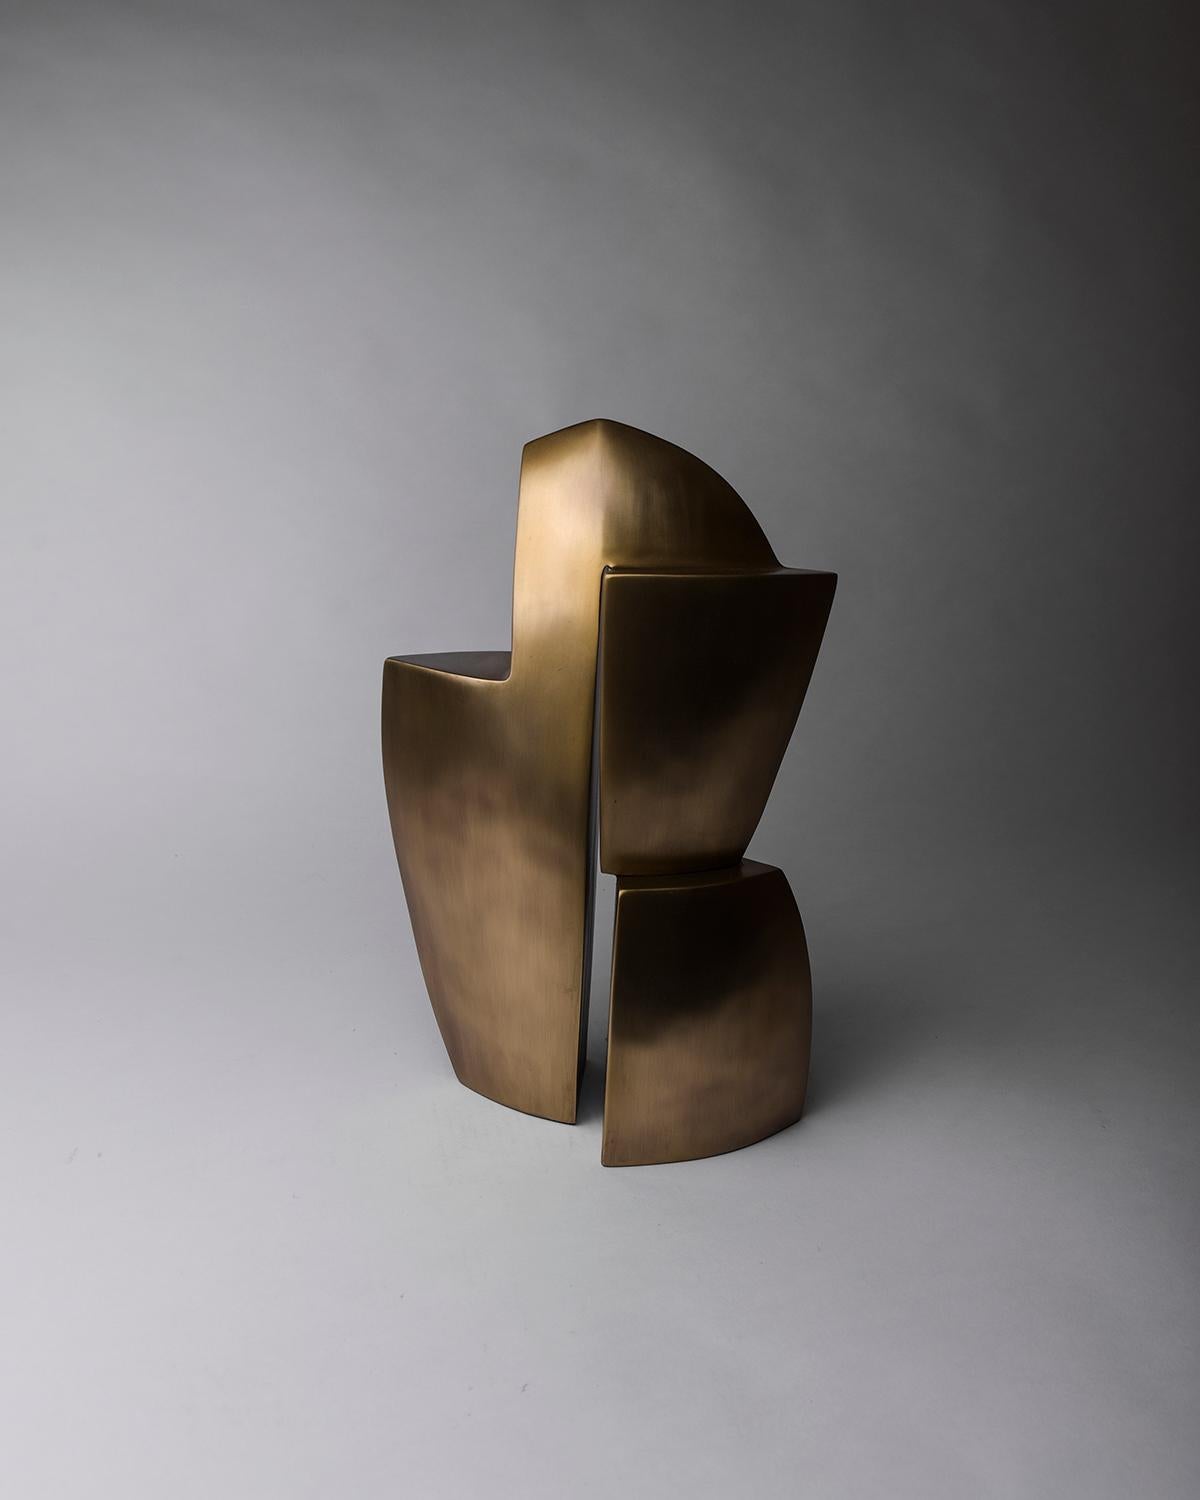 Contemporary Deconstructed Tower Sculpture in Bronze-Patina Brass by Patrick Coard, Paris For Sale